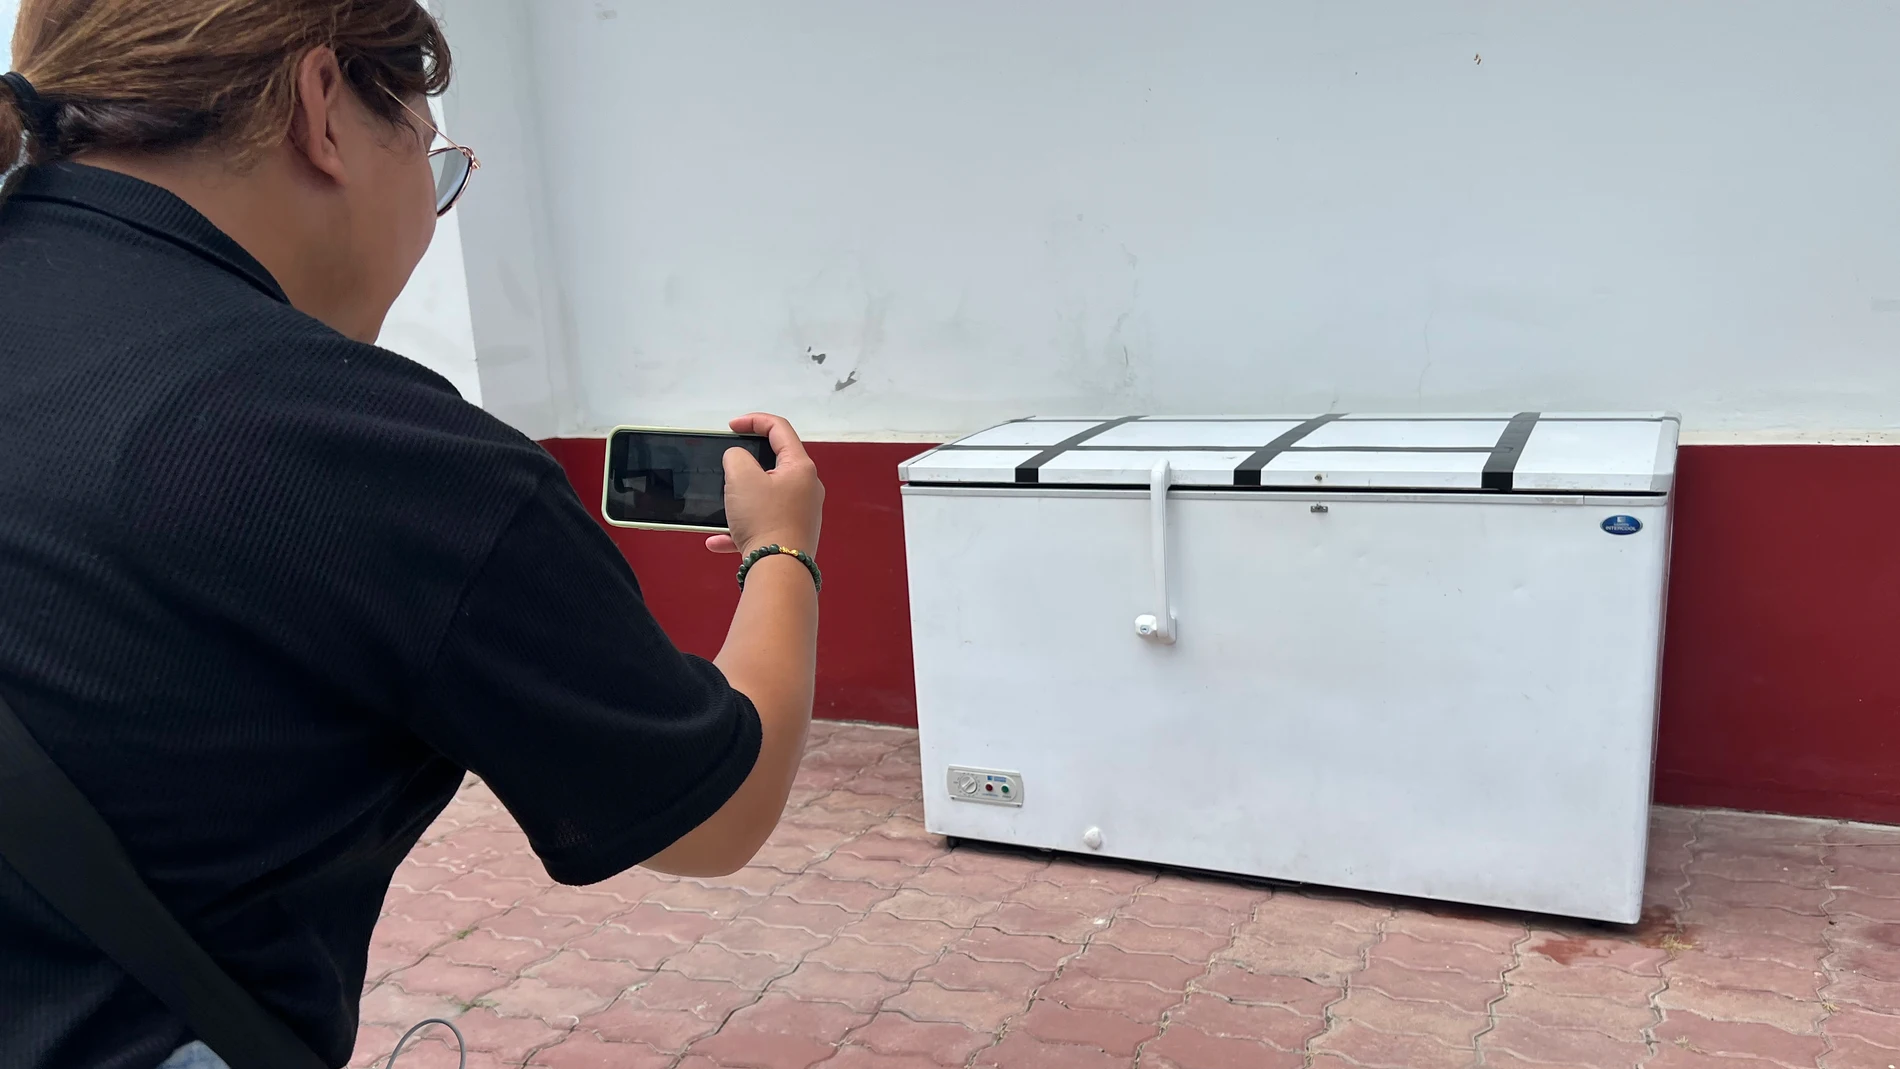 A Thai reporter takes a photo of an empty freezer at the Nong Prue police station in Pattaya, Chonburi province, Thailand, Tuesday, July 11, 2023. The dismembered body of a 62-year-old German businessman Hans-Peter Mack who has been missing for a week has been found in the freezer of a house in southern Thailand, police said Tuesday. (AP Photo)